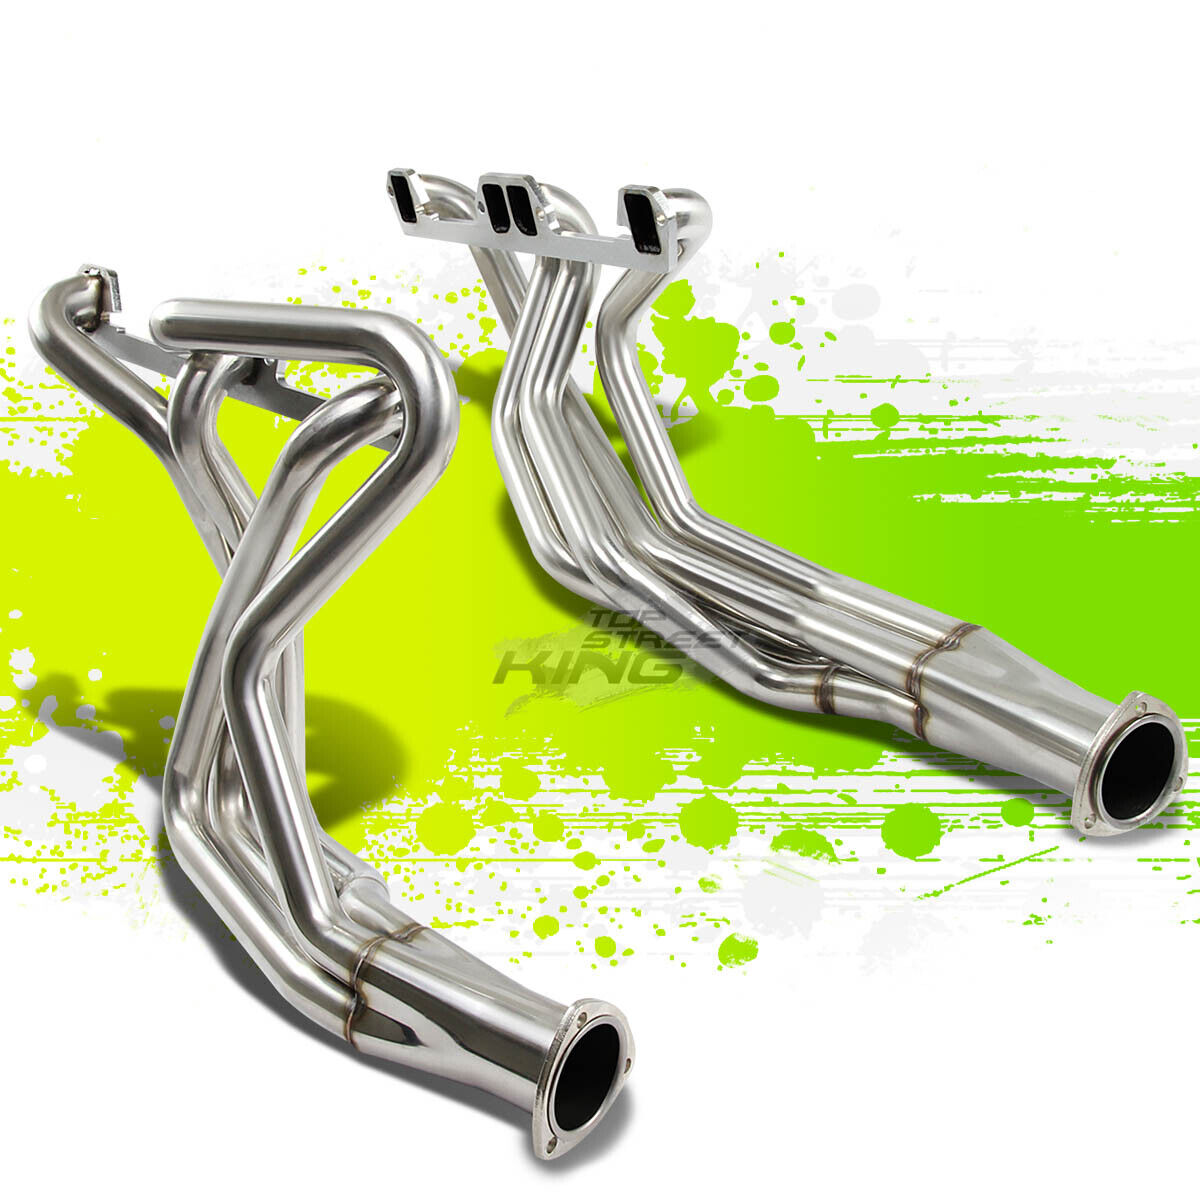 FOR SMALL BLOCK V8 318-360 A-F BODY EXHAUST MANIFOLD RACING HEADER+GASKETS/BOLTS